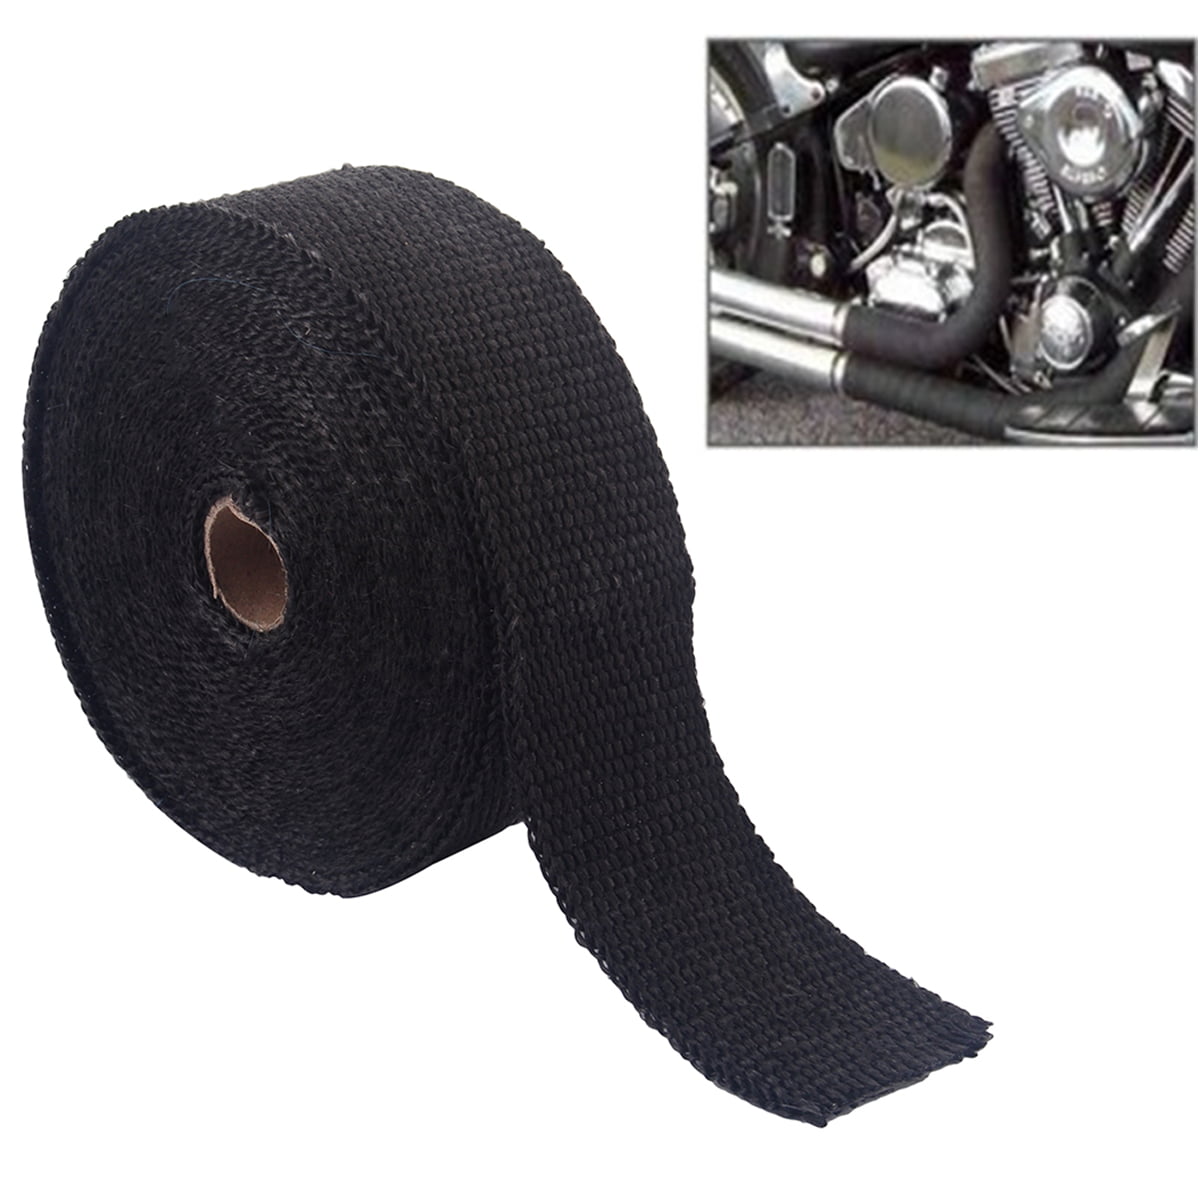 ECCPP Black Exhaust Heat Wrap Roll for Motorcycle Fiberglass Heat Shield Tape with with 10 pcs Stainless Ties